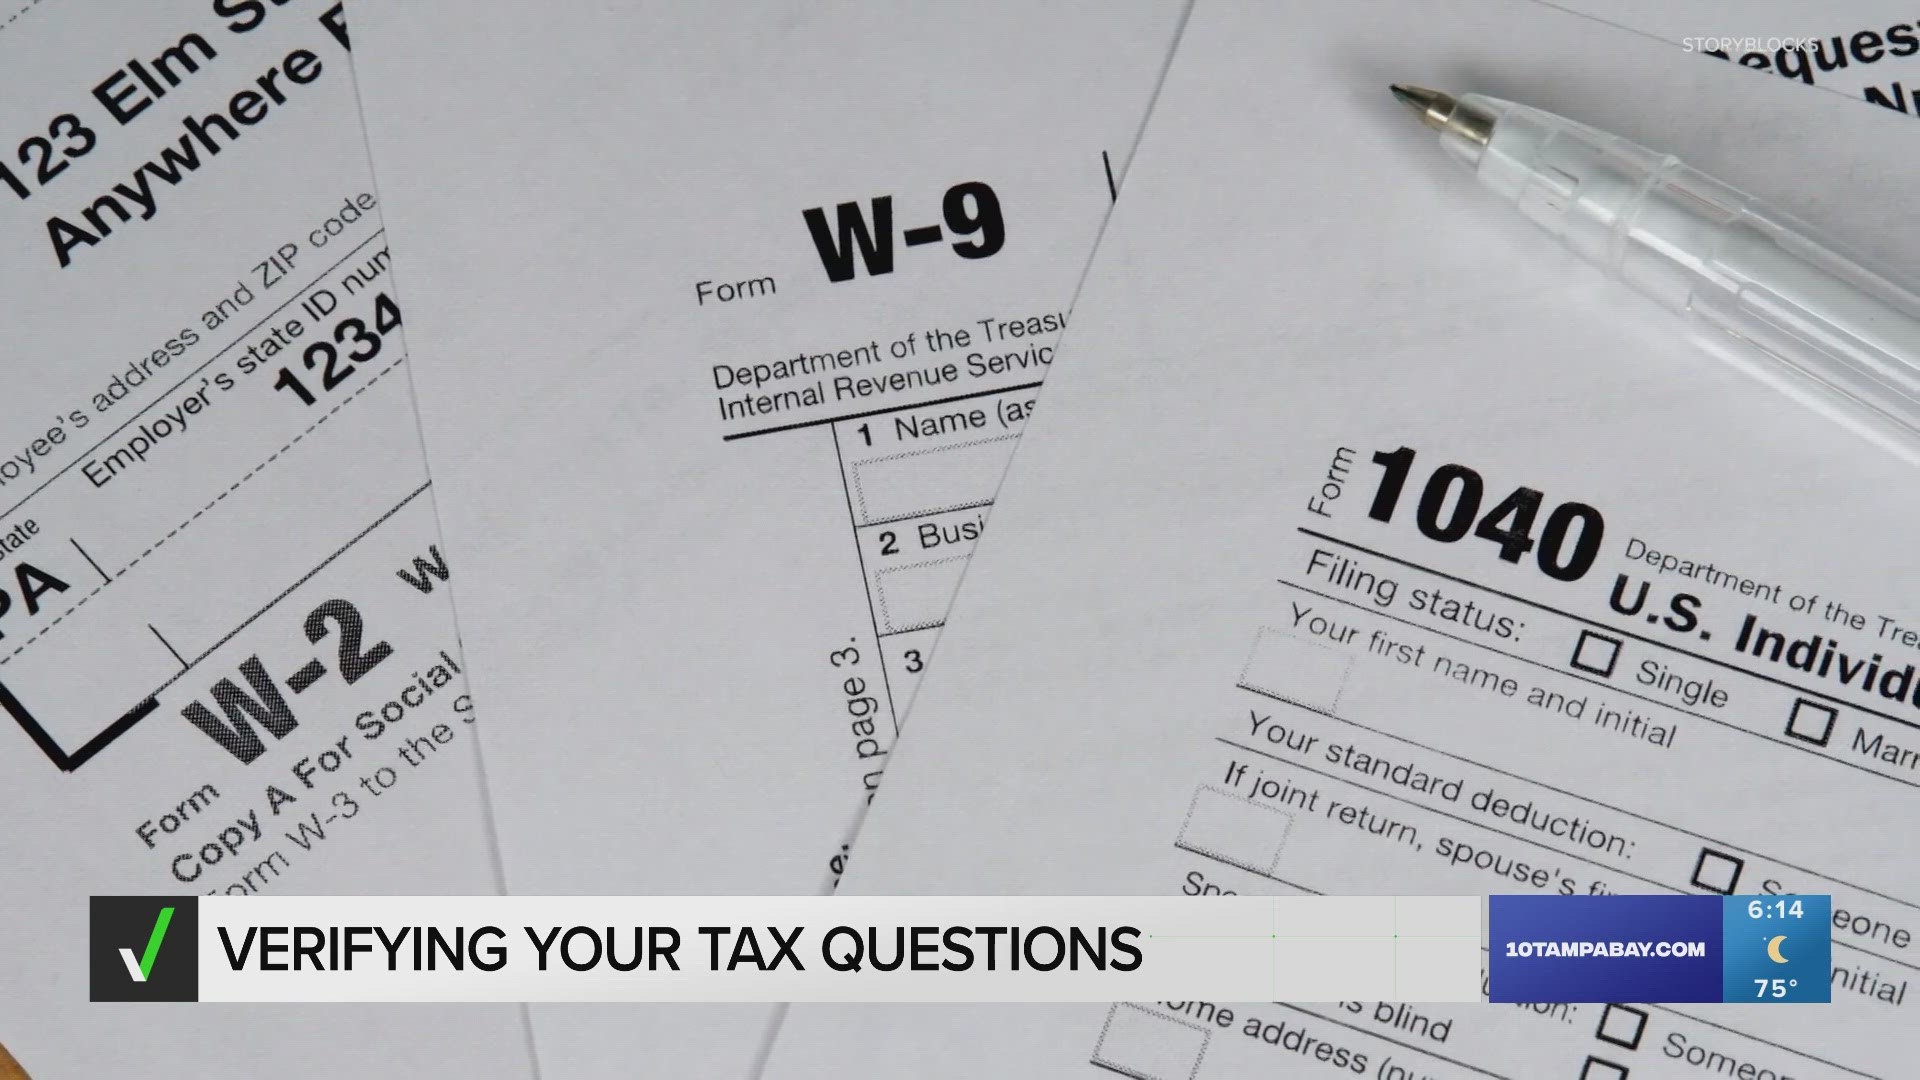 The IRS has an online tool and a mobile app where taxpayers can check the status of their tax return. We explain how it works.